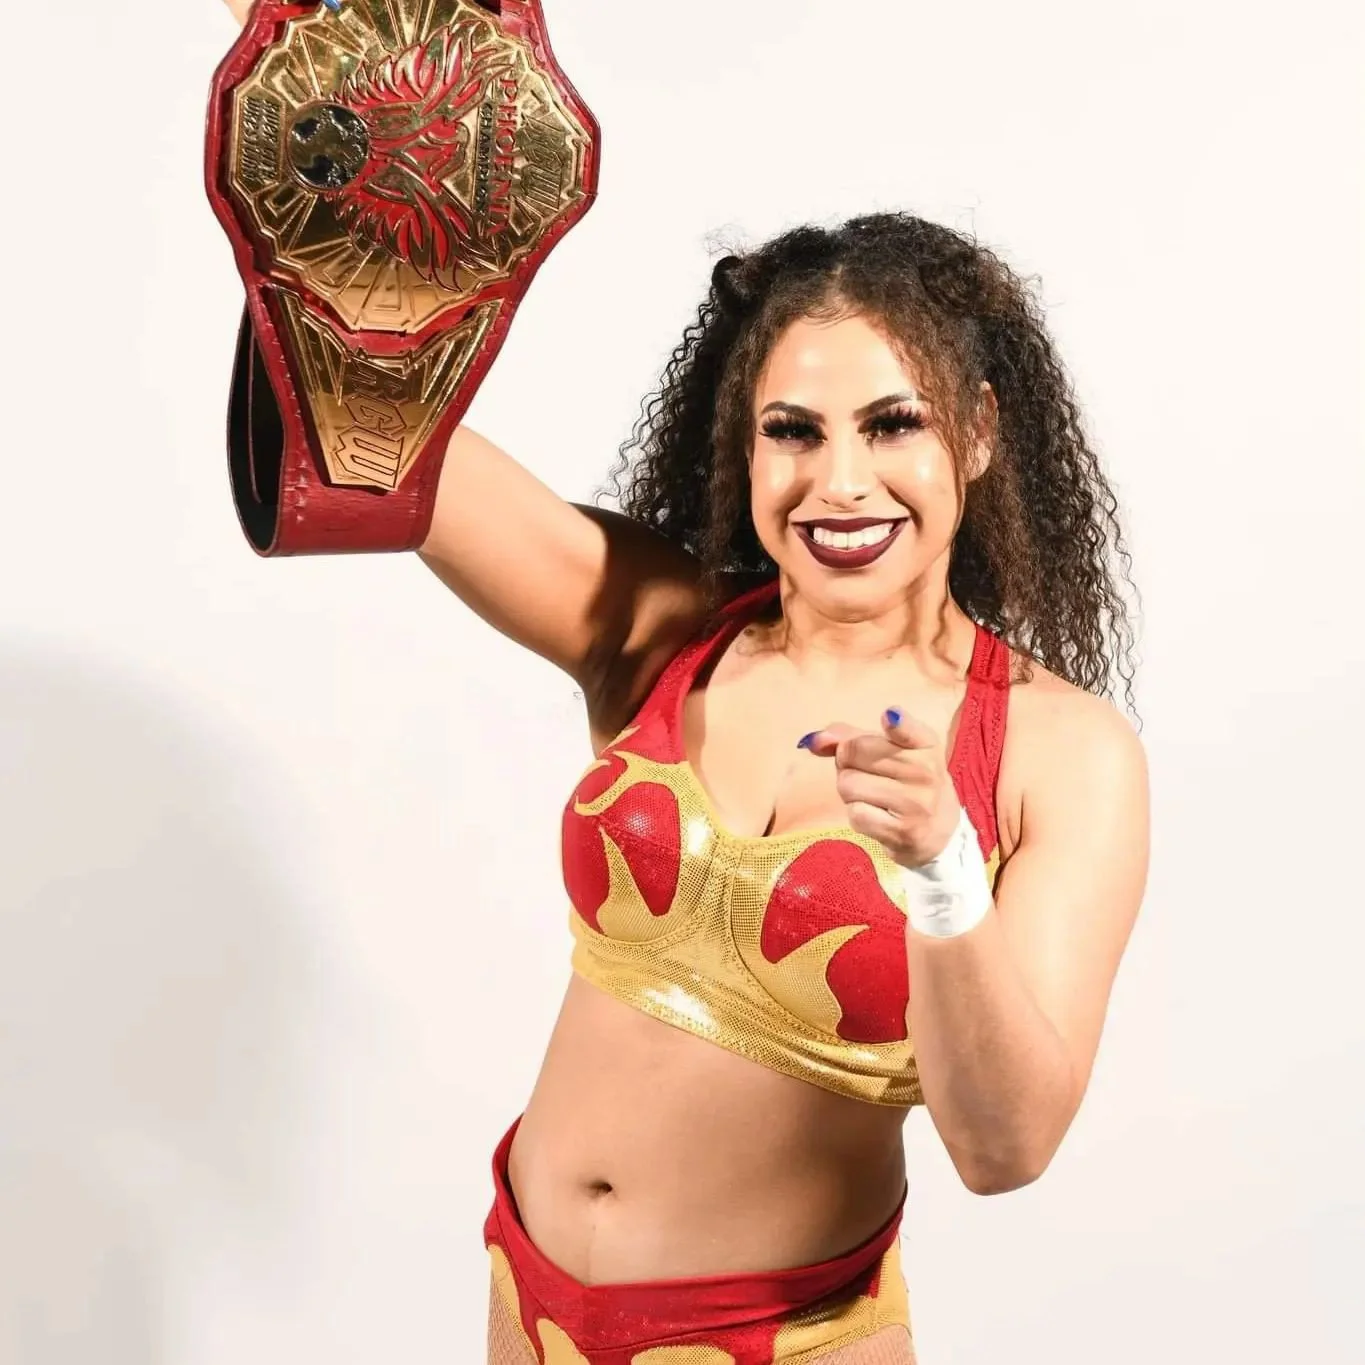 Photo by Ruinedcarpet with the username @Ruinedcarpet,  March 15, 2024 at 4:13 AM. The post is about the topic Women of wrestling and the text says 'Alejandra Lion.

#AlejandraLion #Latina #ProWrestler #Brunette #Beauty #Clothed #WrestlingGear #Smile #WomensWrestling #ProWrestling'